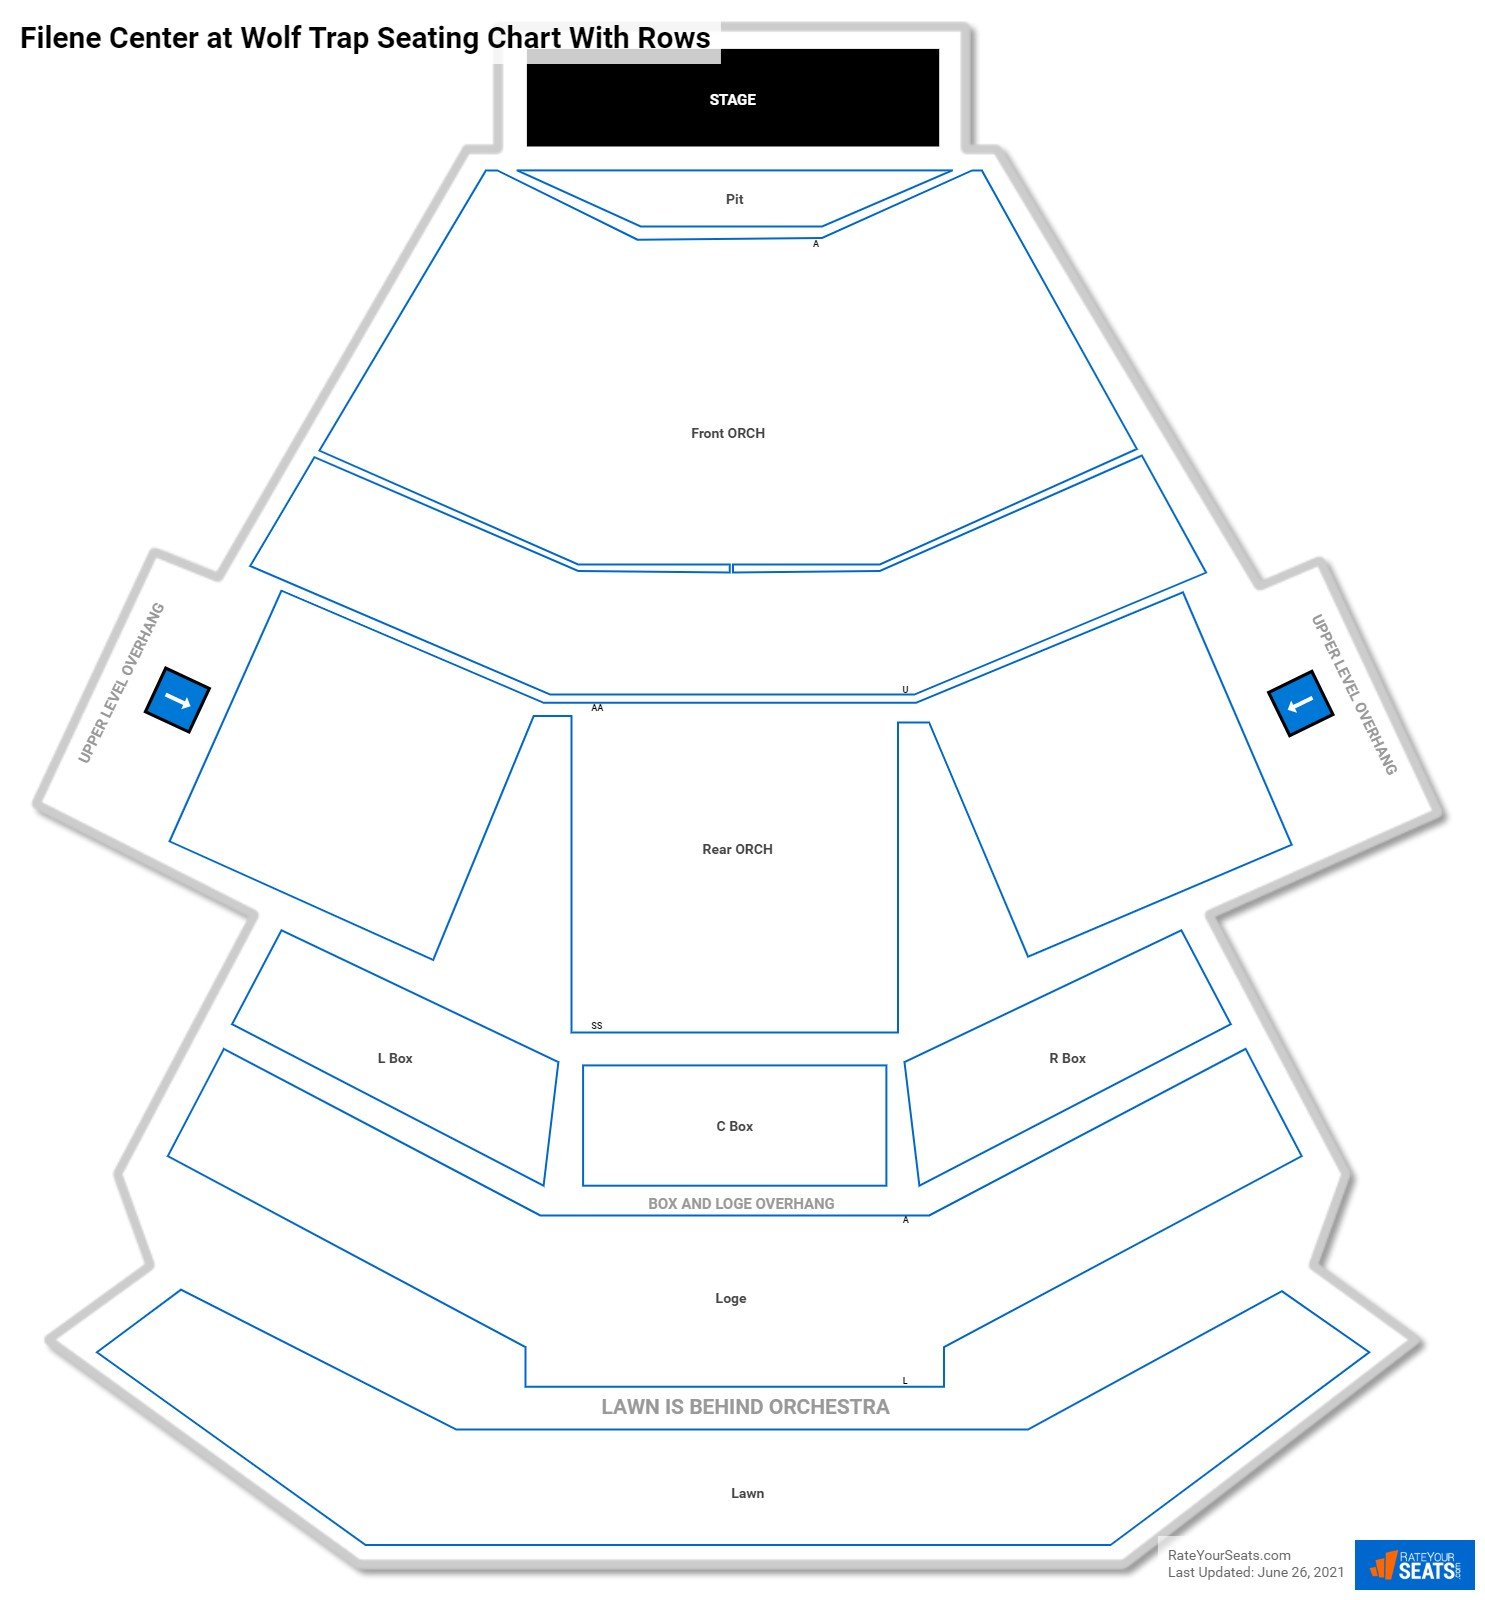 Filene Center at Wolf Trap seating chart with row numbers